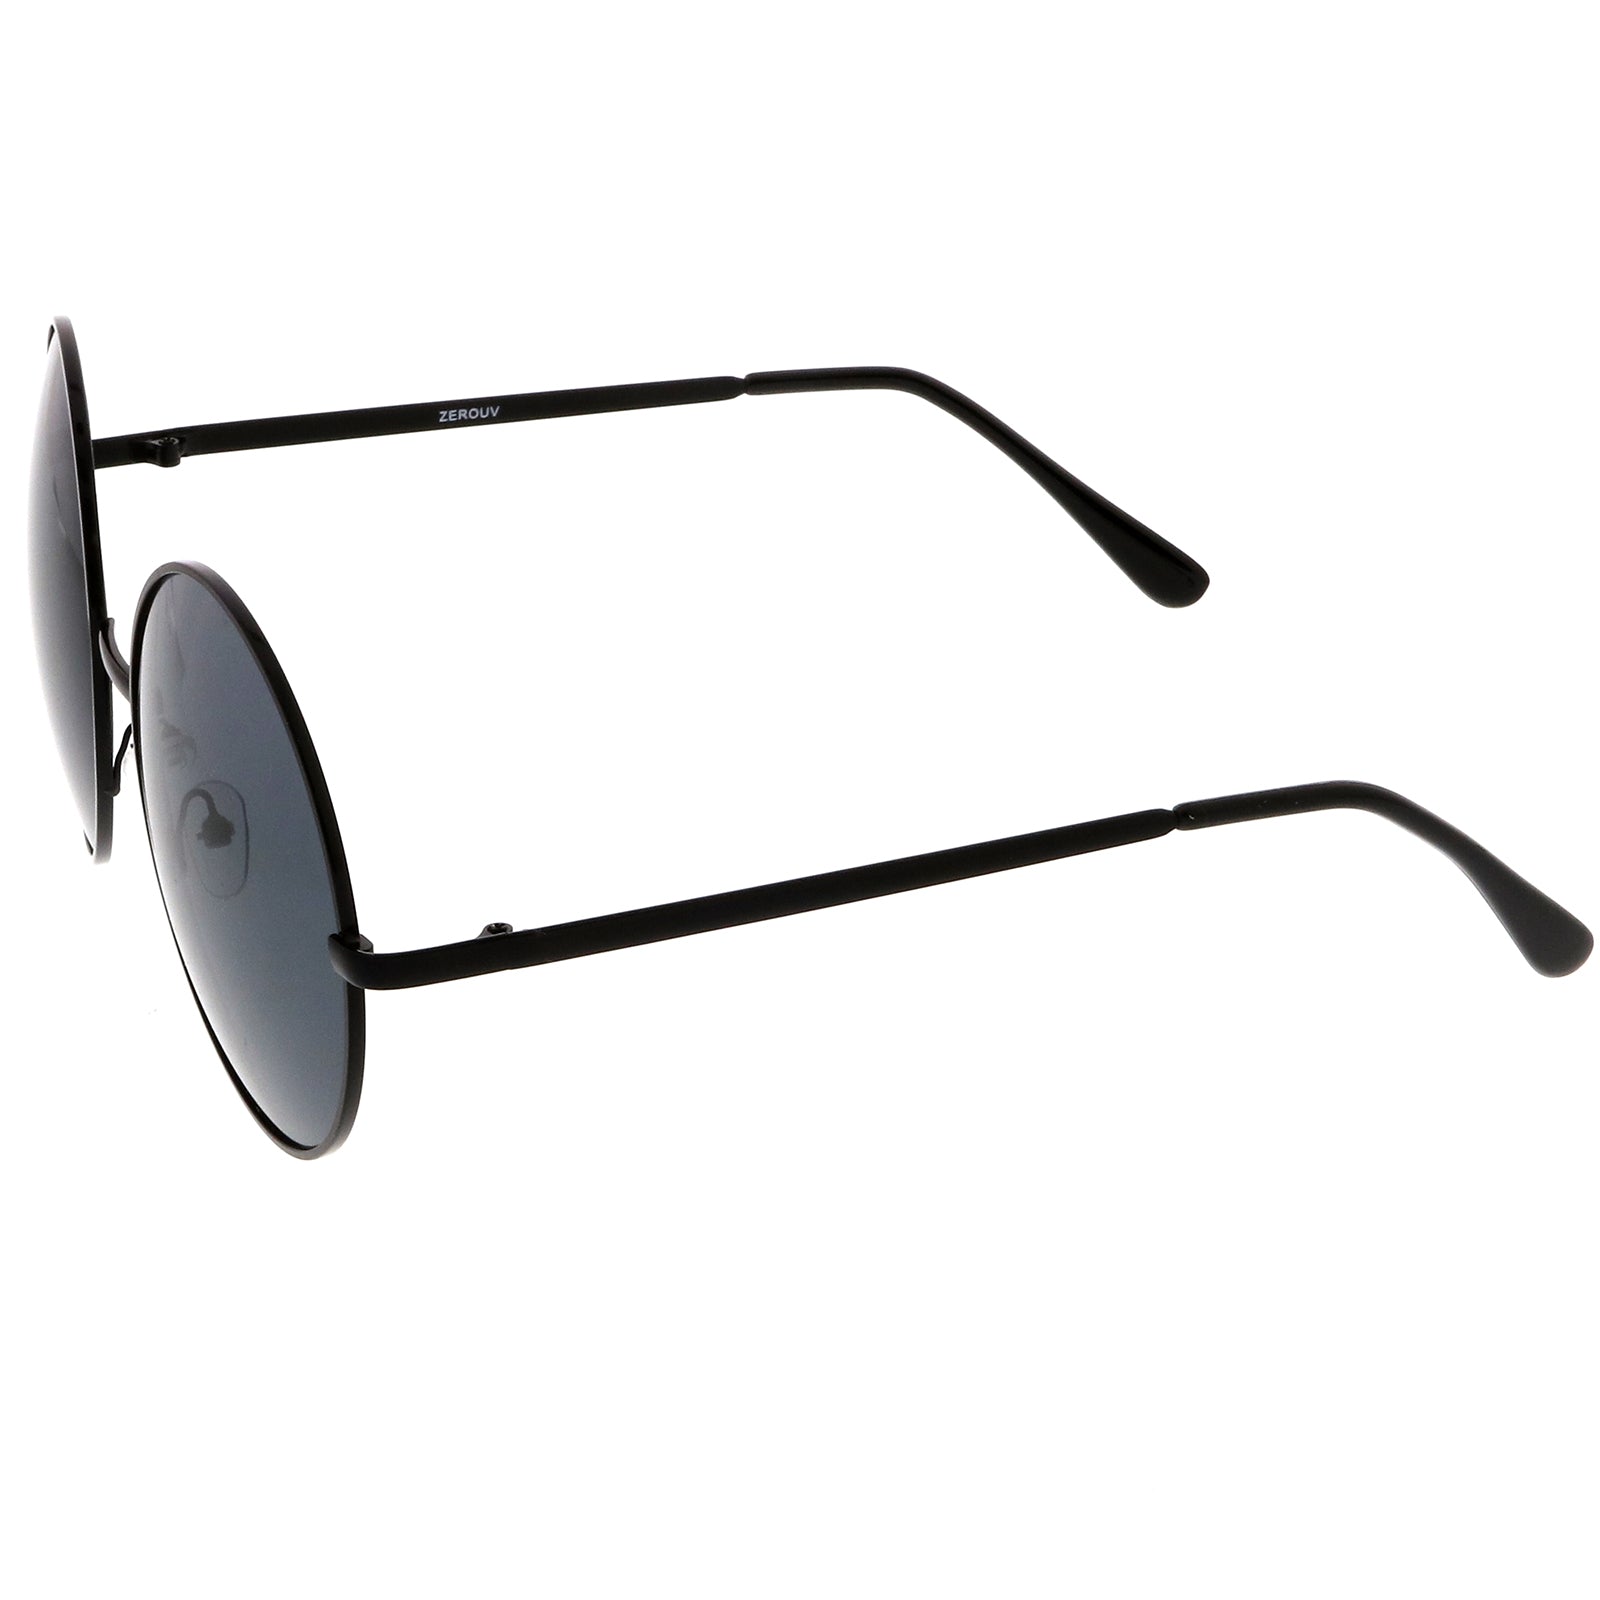 111 Big Round Sunglasses Stock Video Footage - 4K and HD Video Clips |  Shutterstock